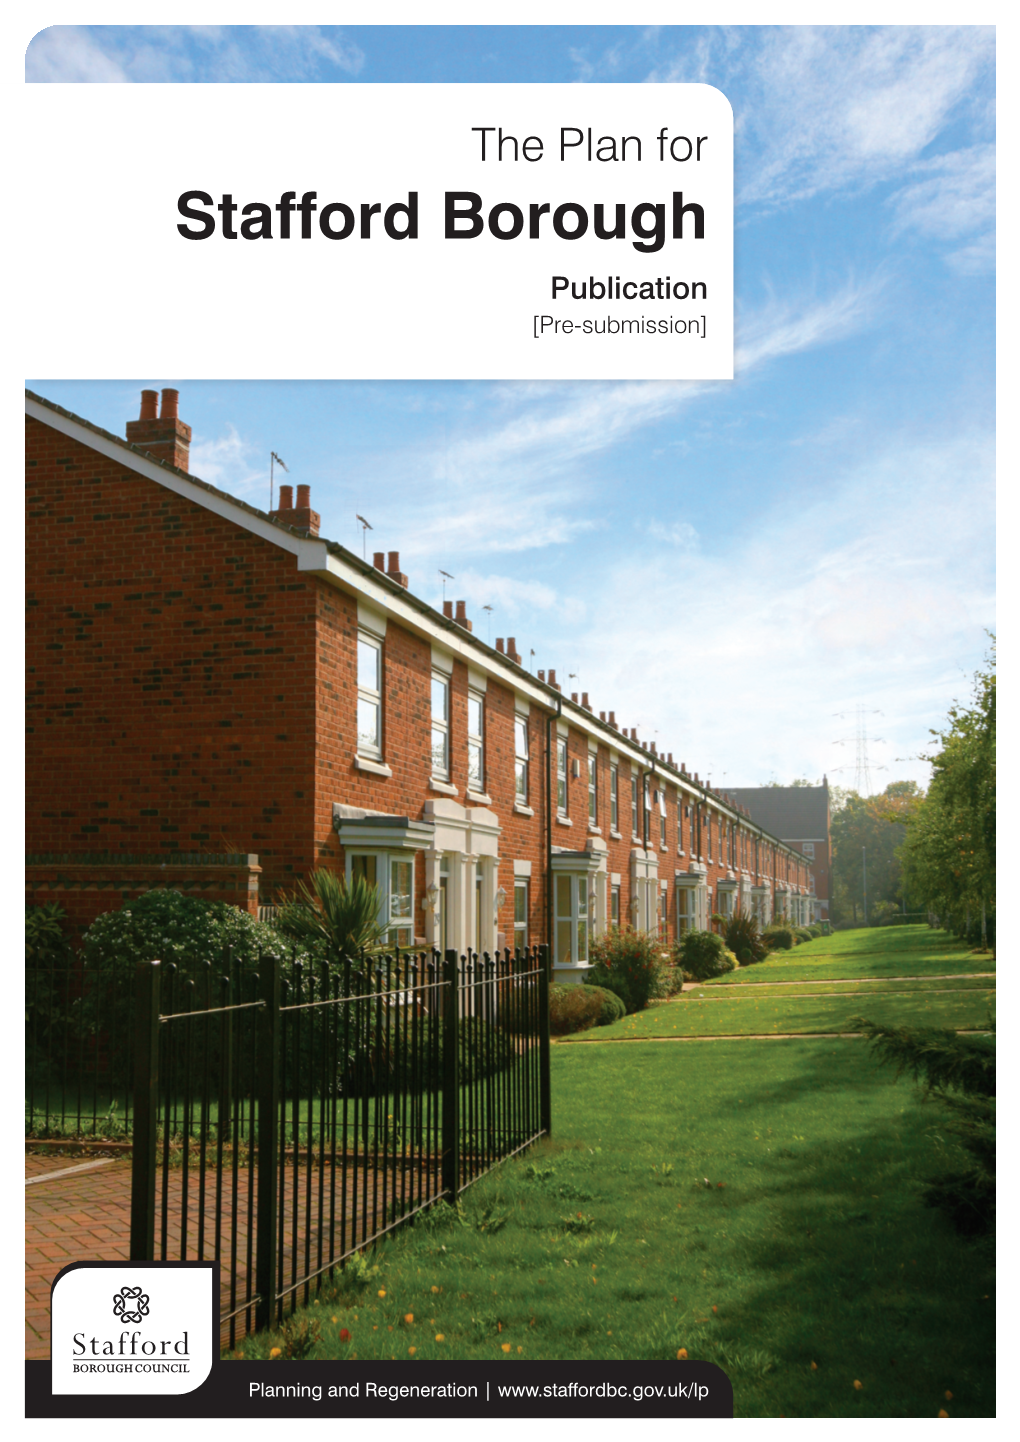 The Plan for Stafford Borough- Publication (Submission) Document